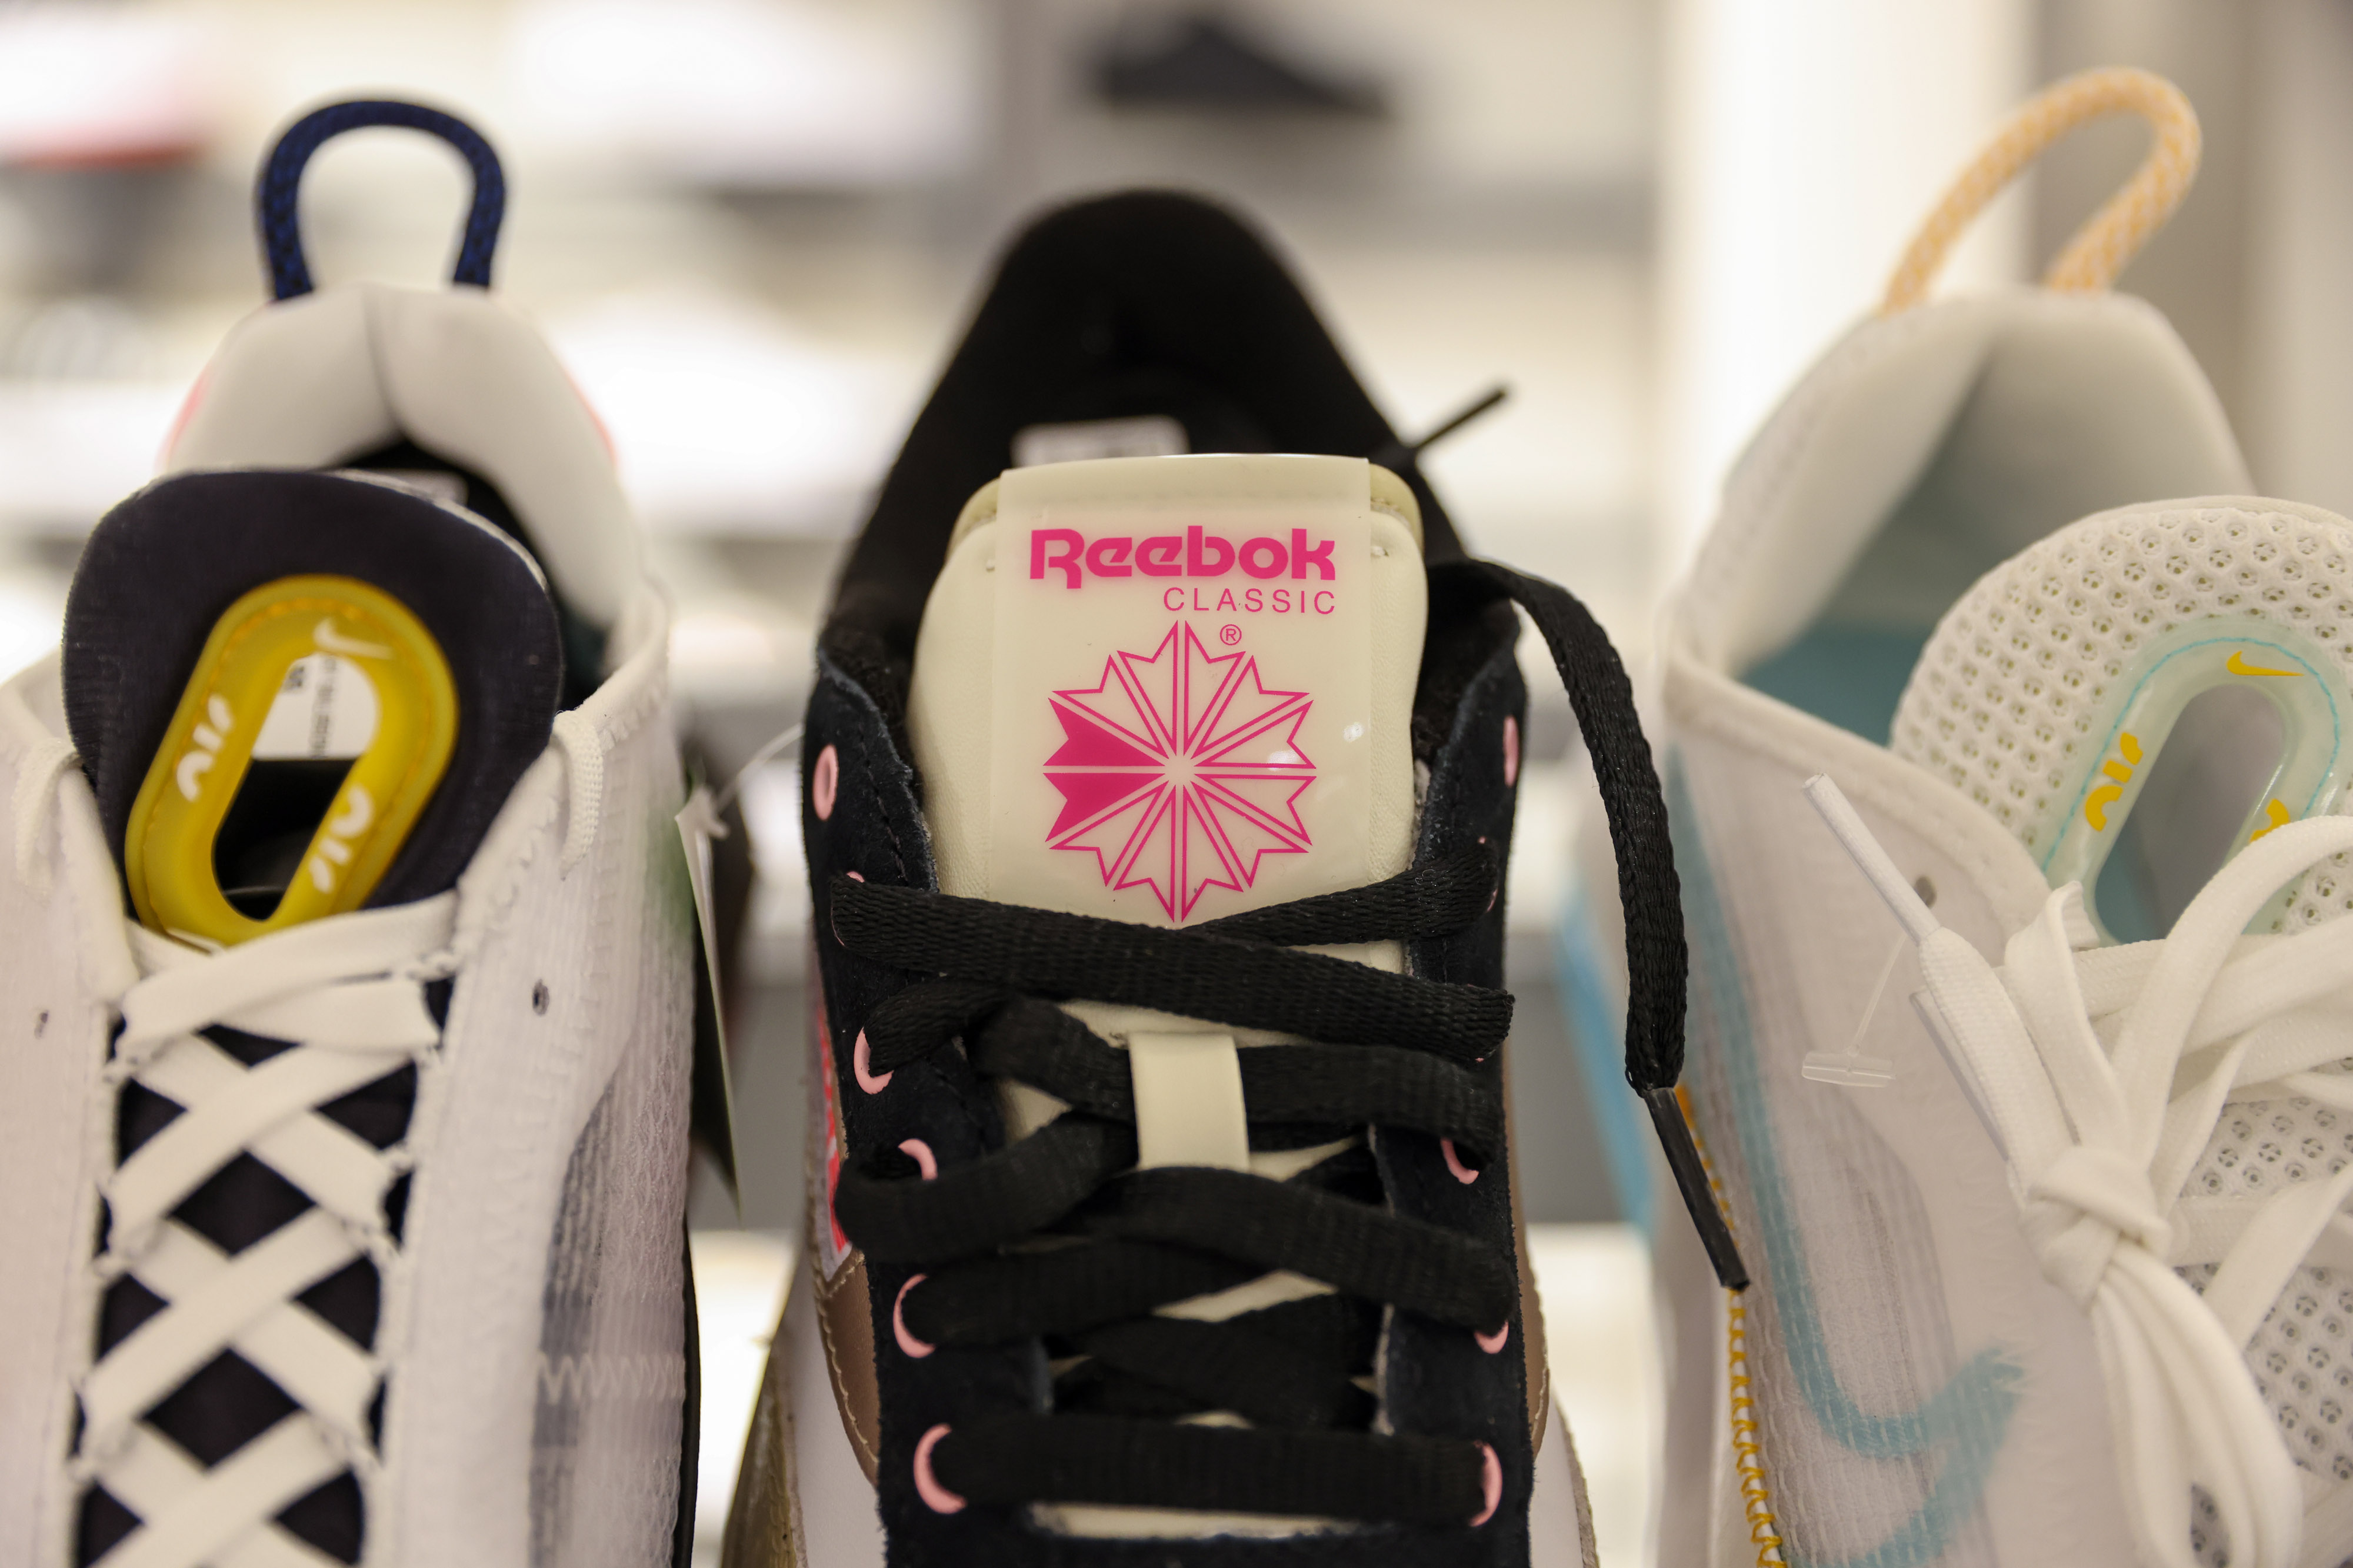 Adidas to Sell Reebok Authentic Brands for Up to $2.5 Billion -